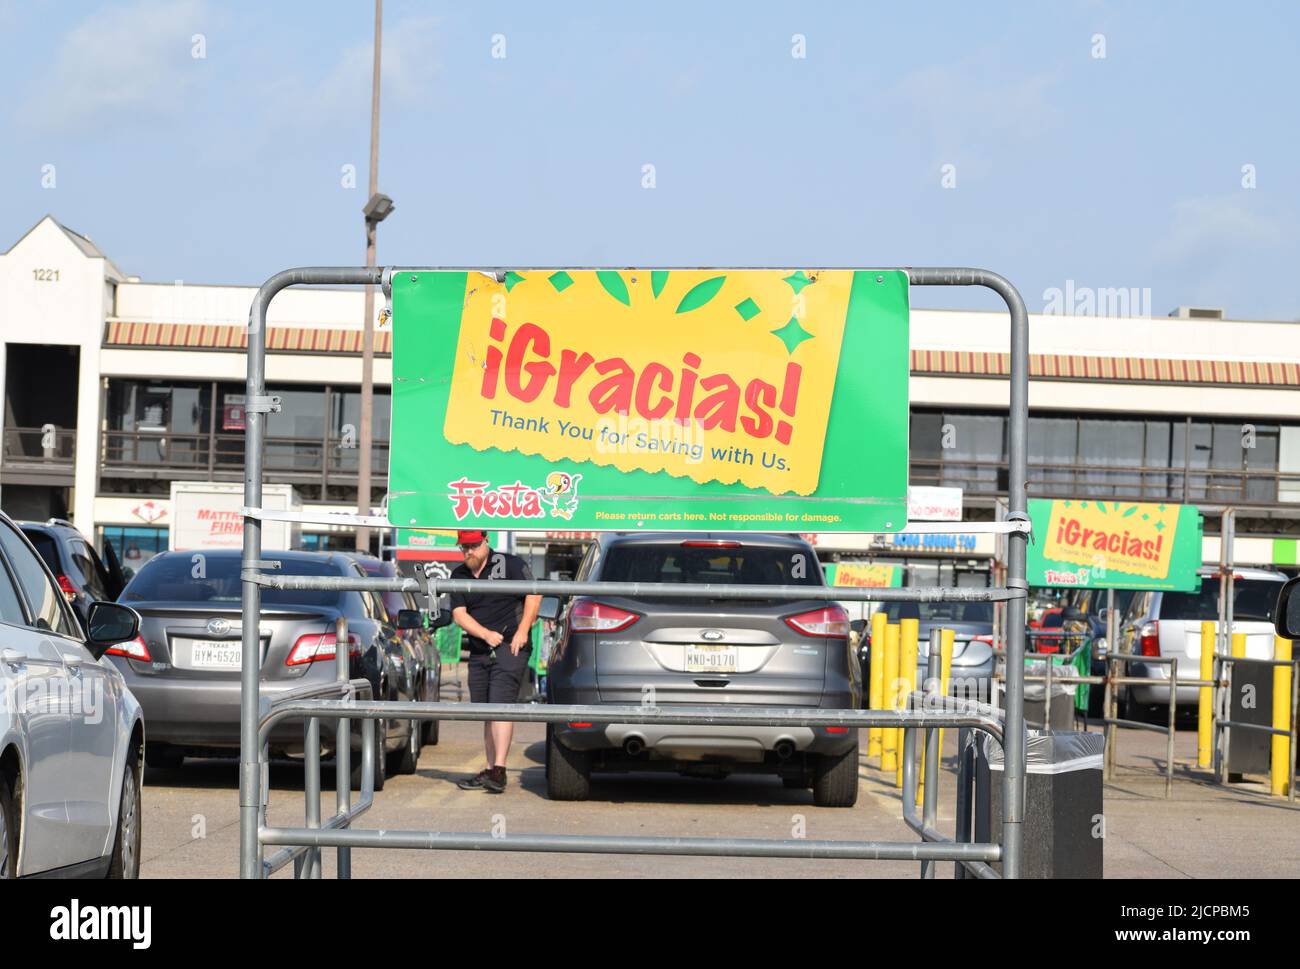 Grocery cart corral at a Fiesta grocery store in Texas, the word Gracias is prominent on the corral Stock Photo